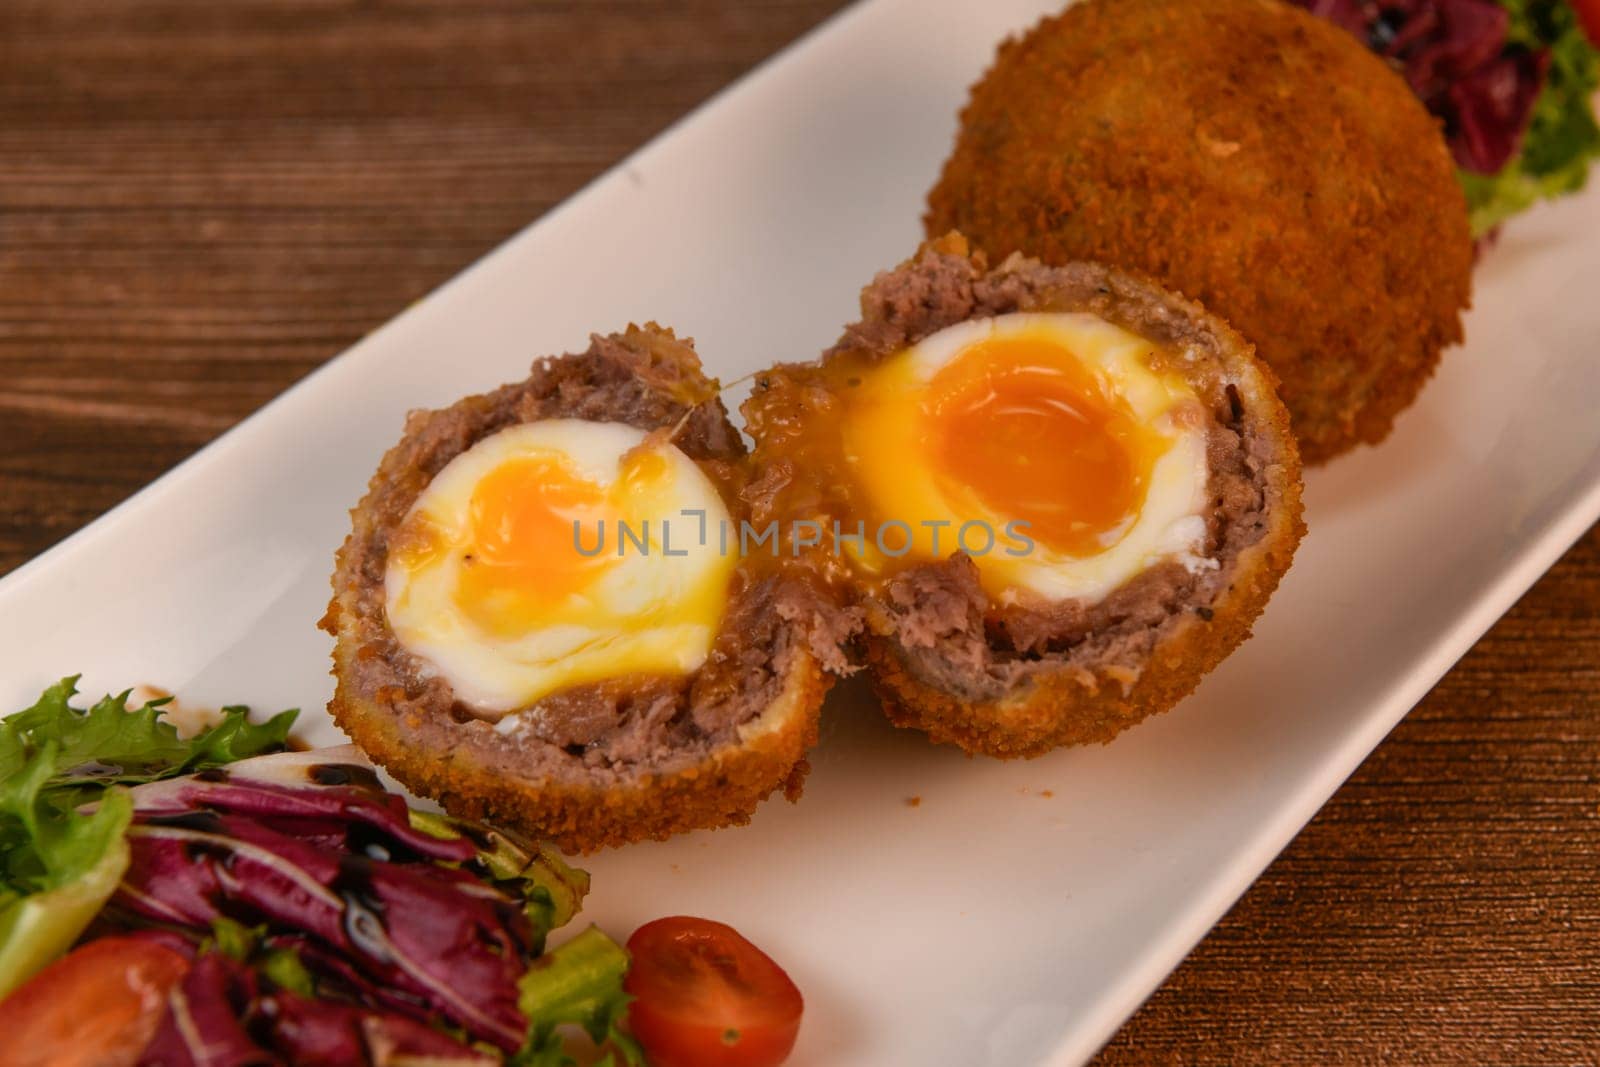 RECIPE FOR BREADED BEEF MEATBALLS STUFFED WITH A SOFT BOILED EGG by FreeProd